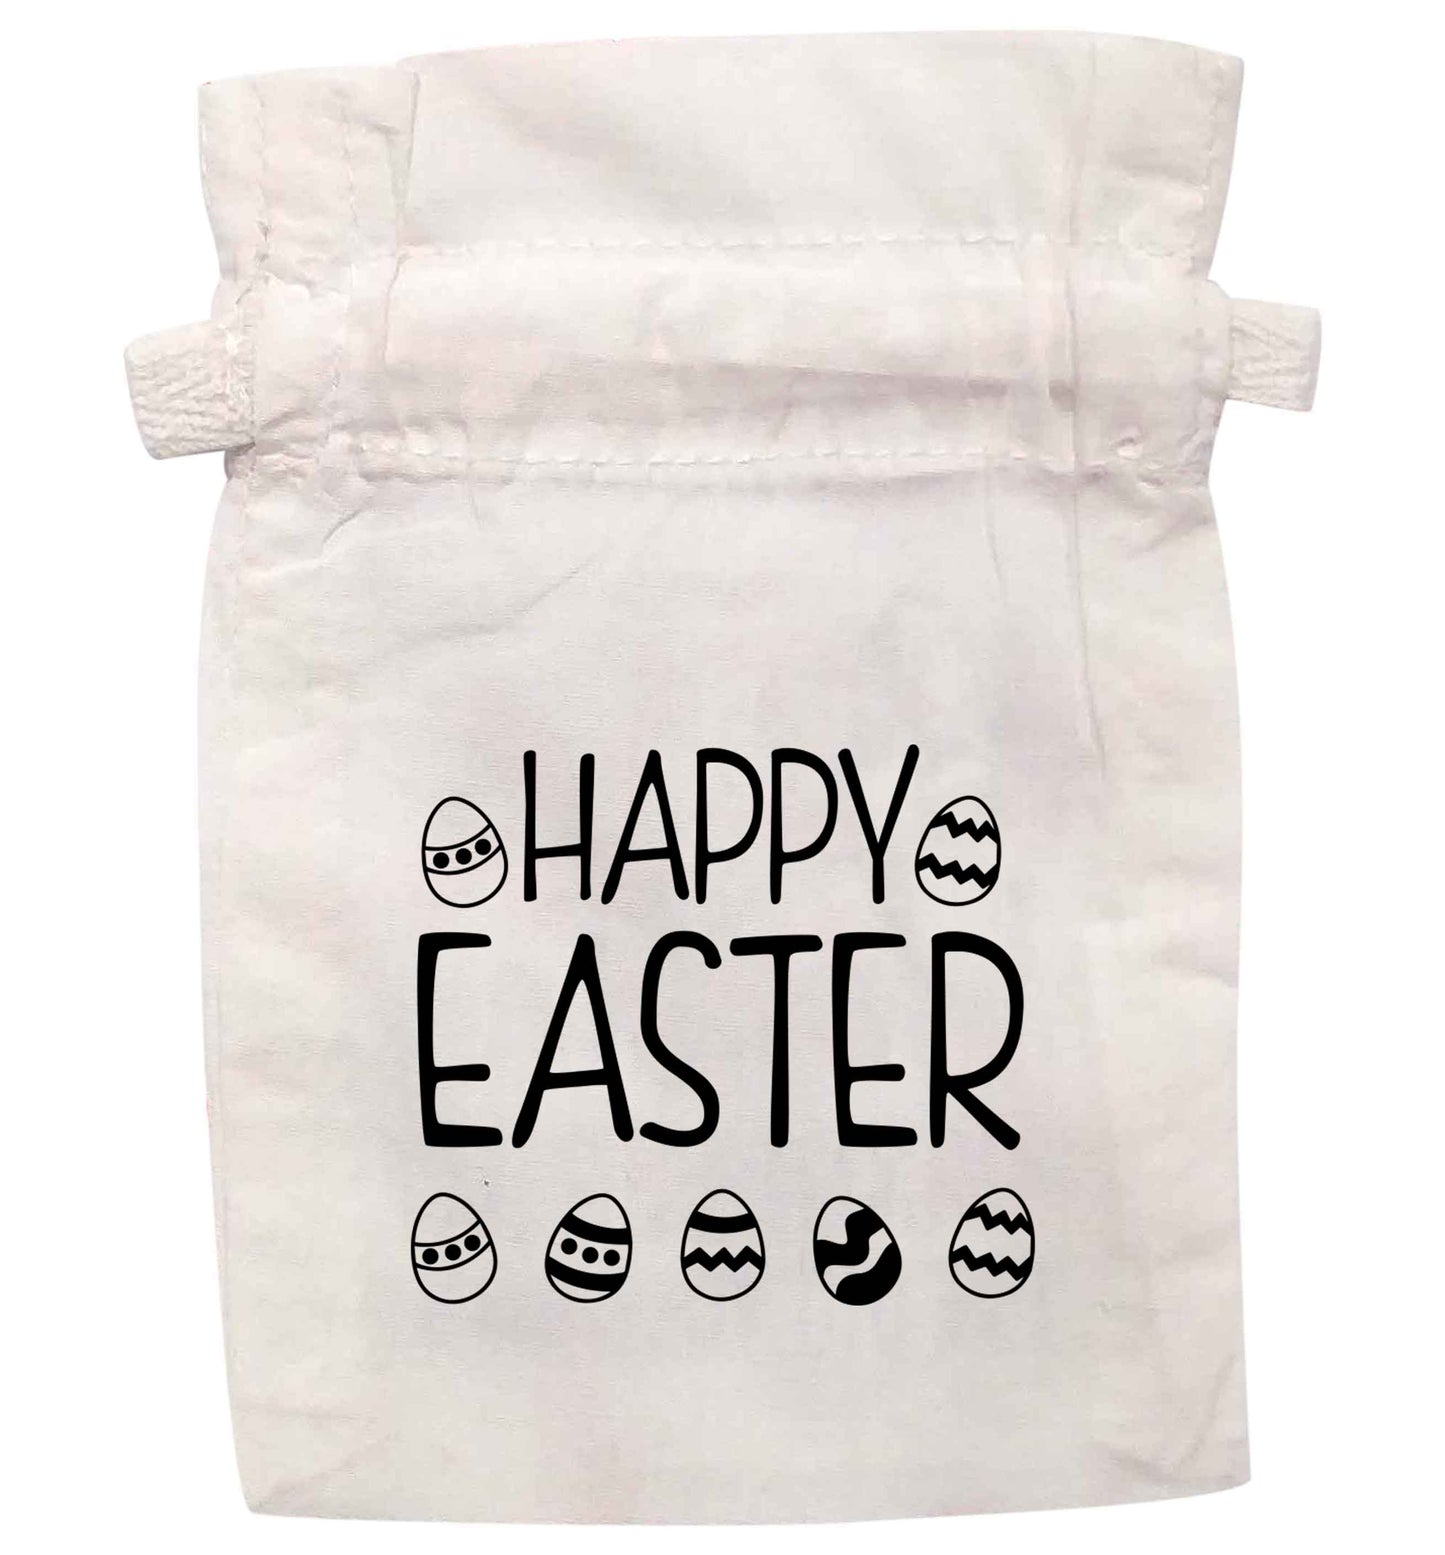 Happy Easter | XS - L | Pouch / Drawstring bag / Sack | Organic Cotton | Bulk discounts available!